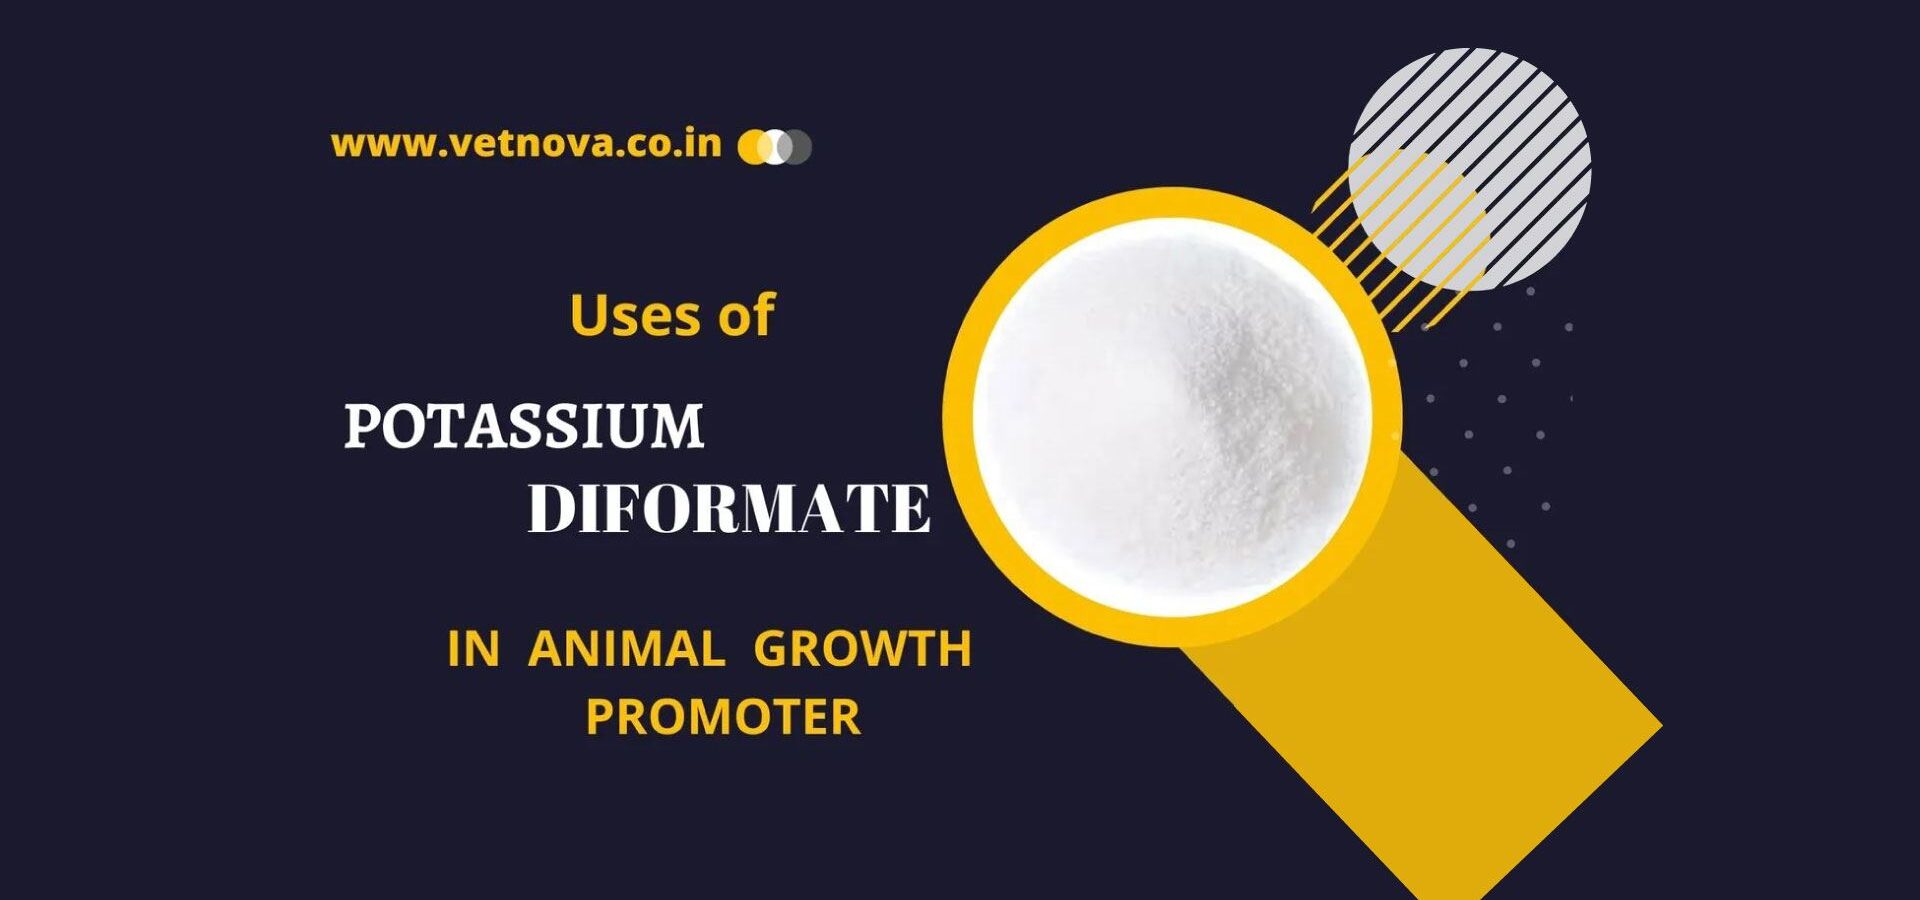 Uses of Potassium Diformate in Animal Growth Promoter